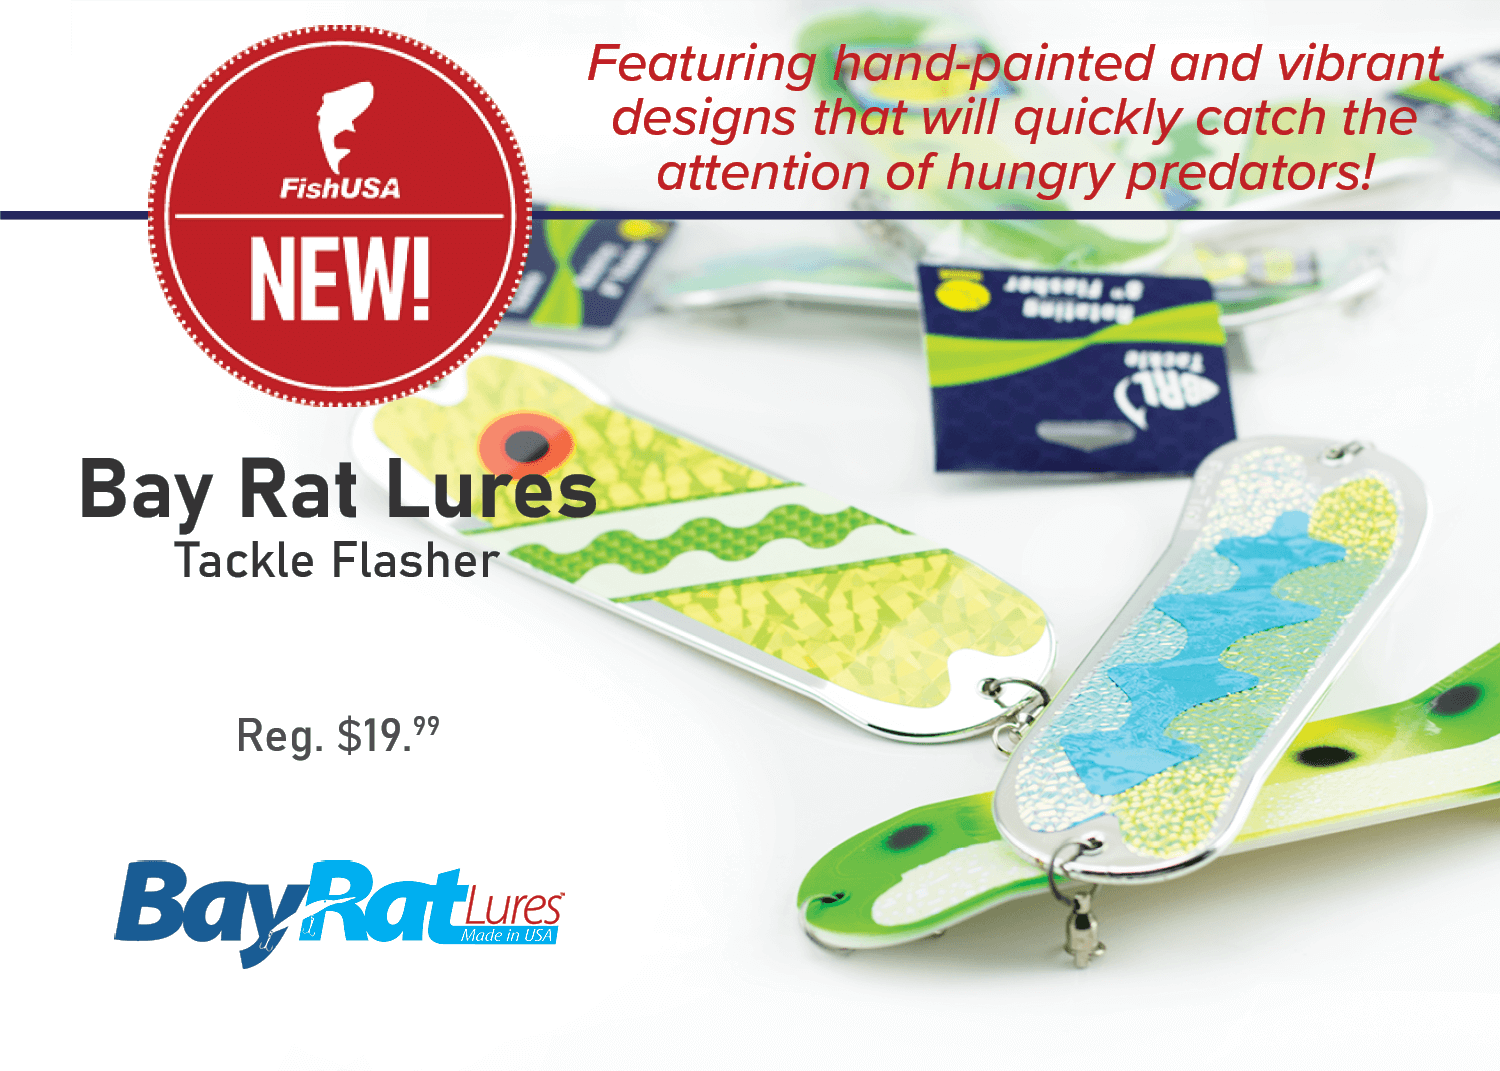 Bay Rat Lures Tackle Flasher